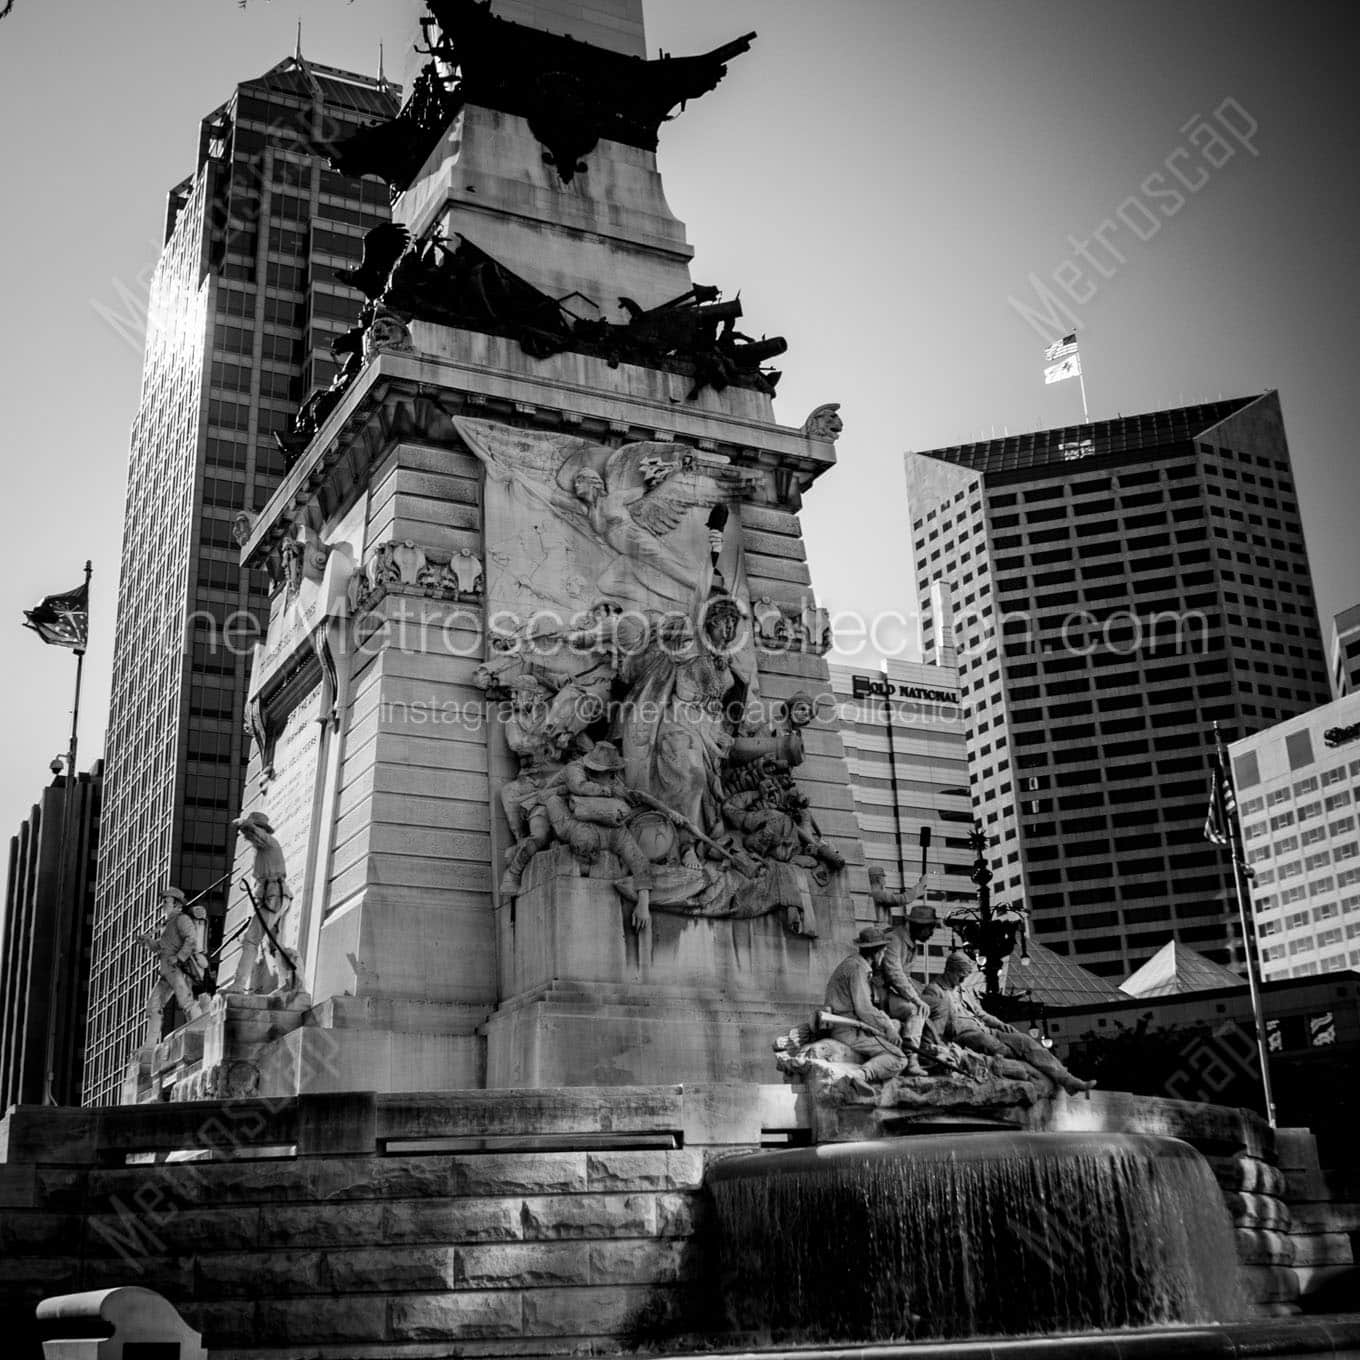 east side soldiers sailors monument Black & White Wall Art